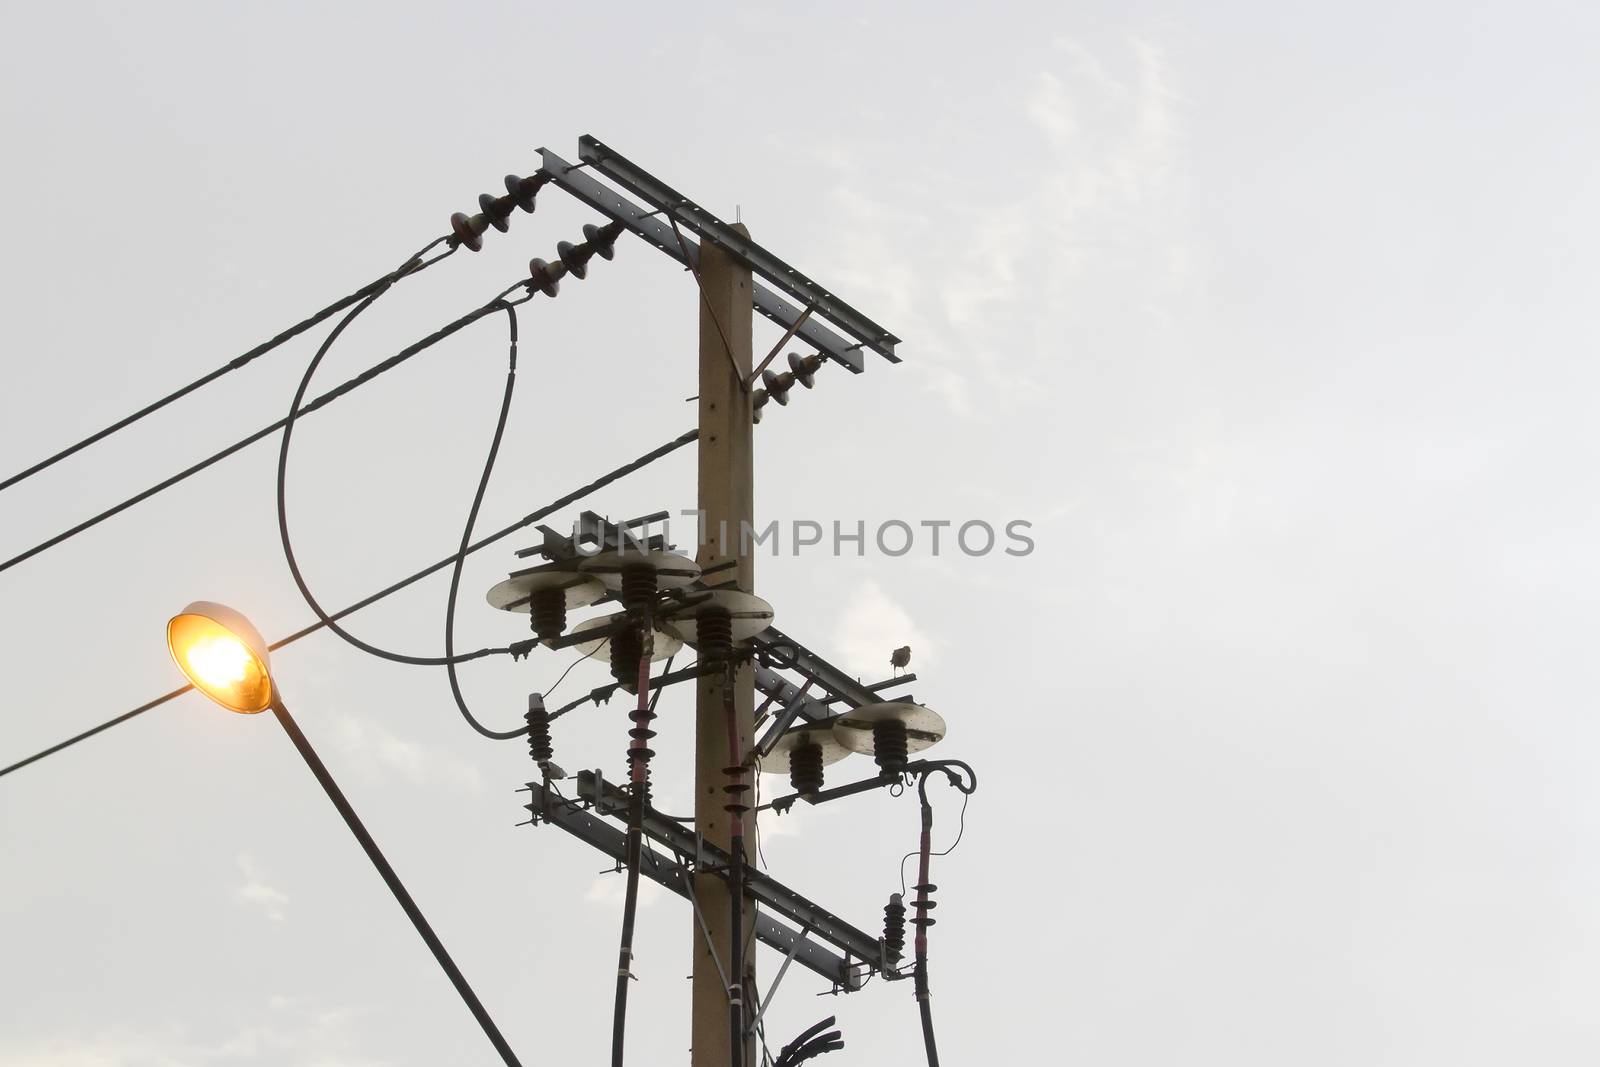 Power poles with lights in the evening. by TakerWalker